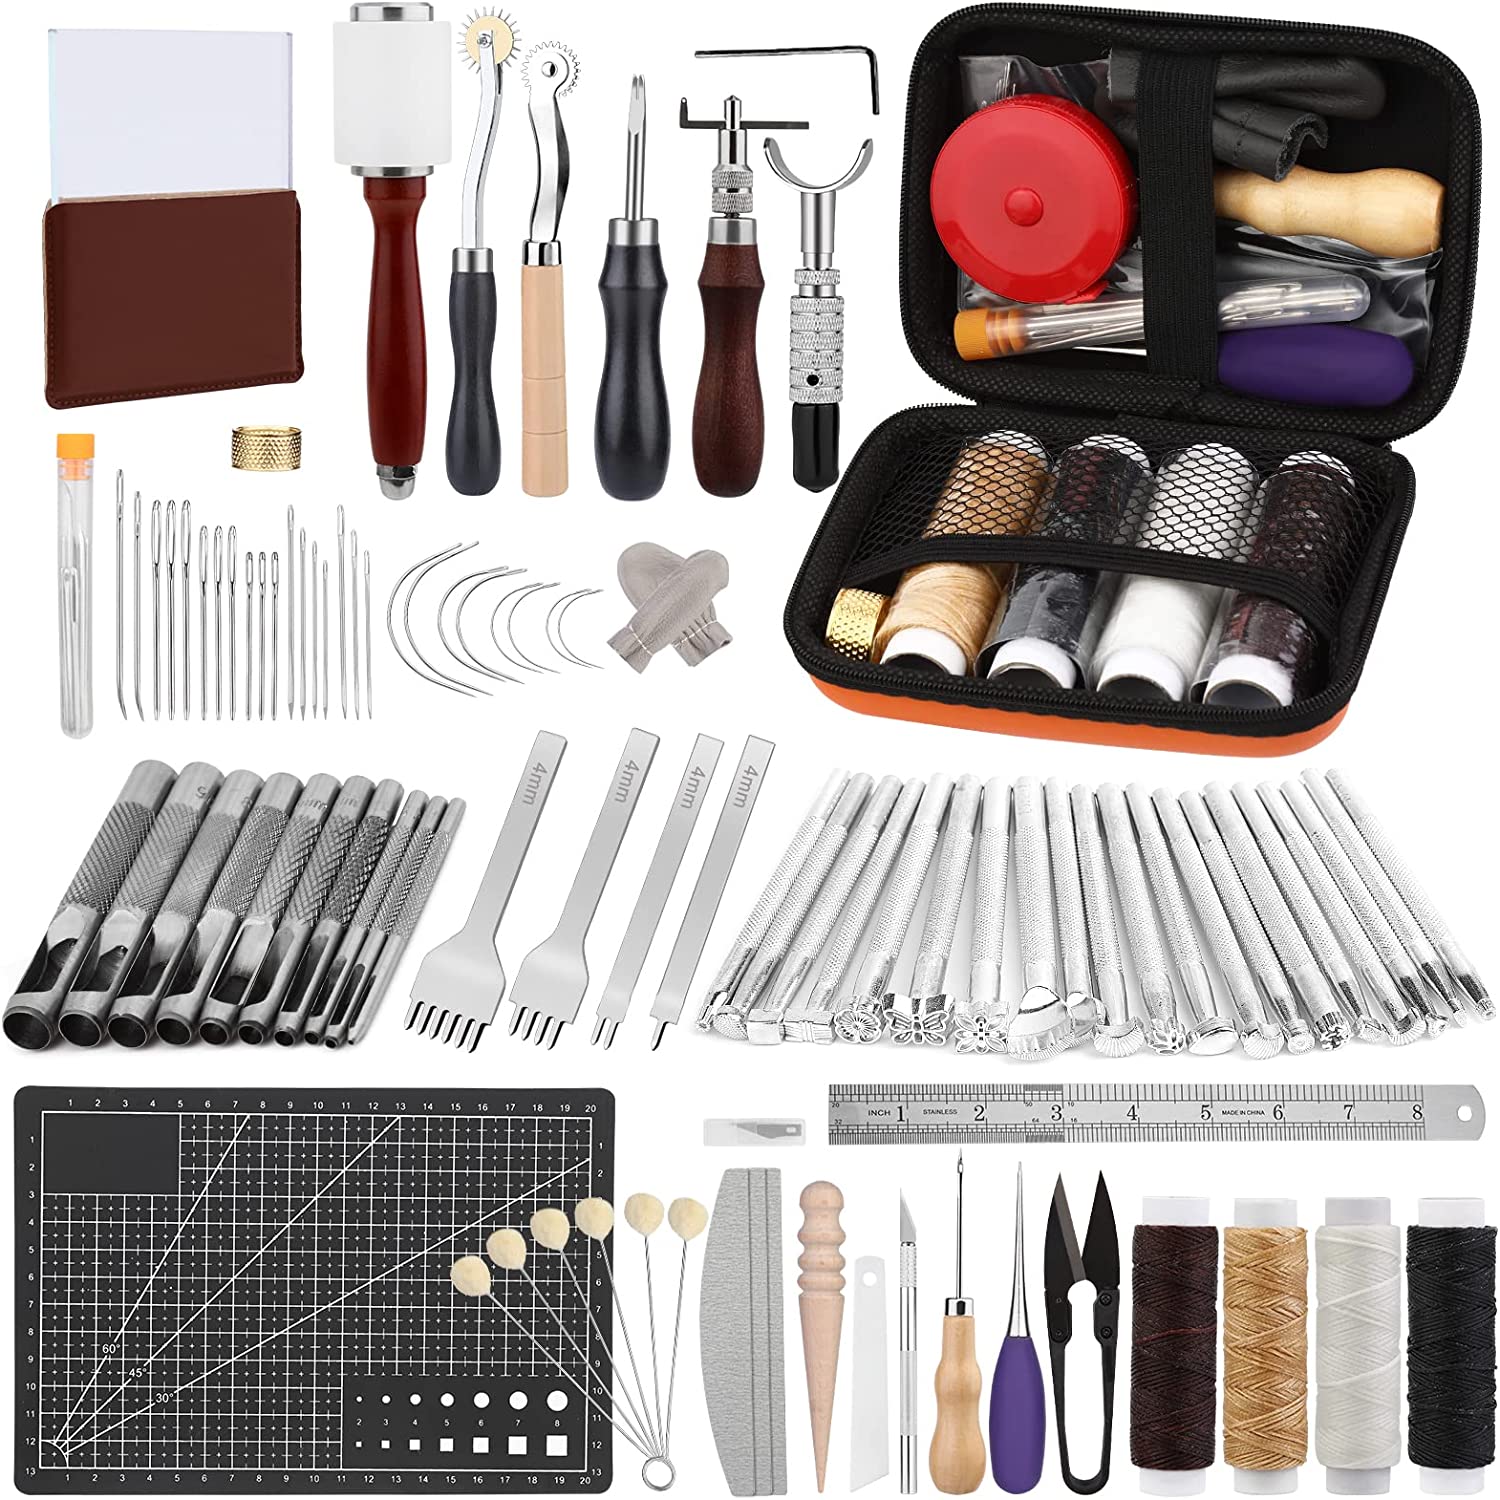 BUTUZE 489pcs Leather Working Tools Kit with Instructions,Leather Sewing Tools Kit Leather Working Supplies with Leather Craft Stamping Tools,Gift